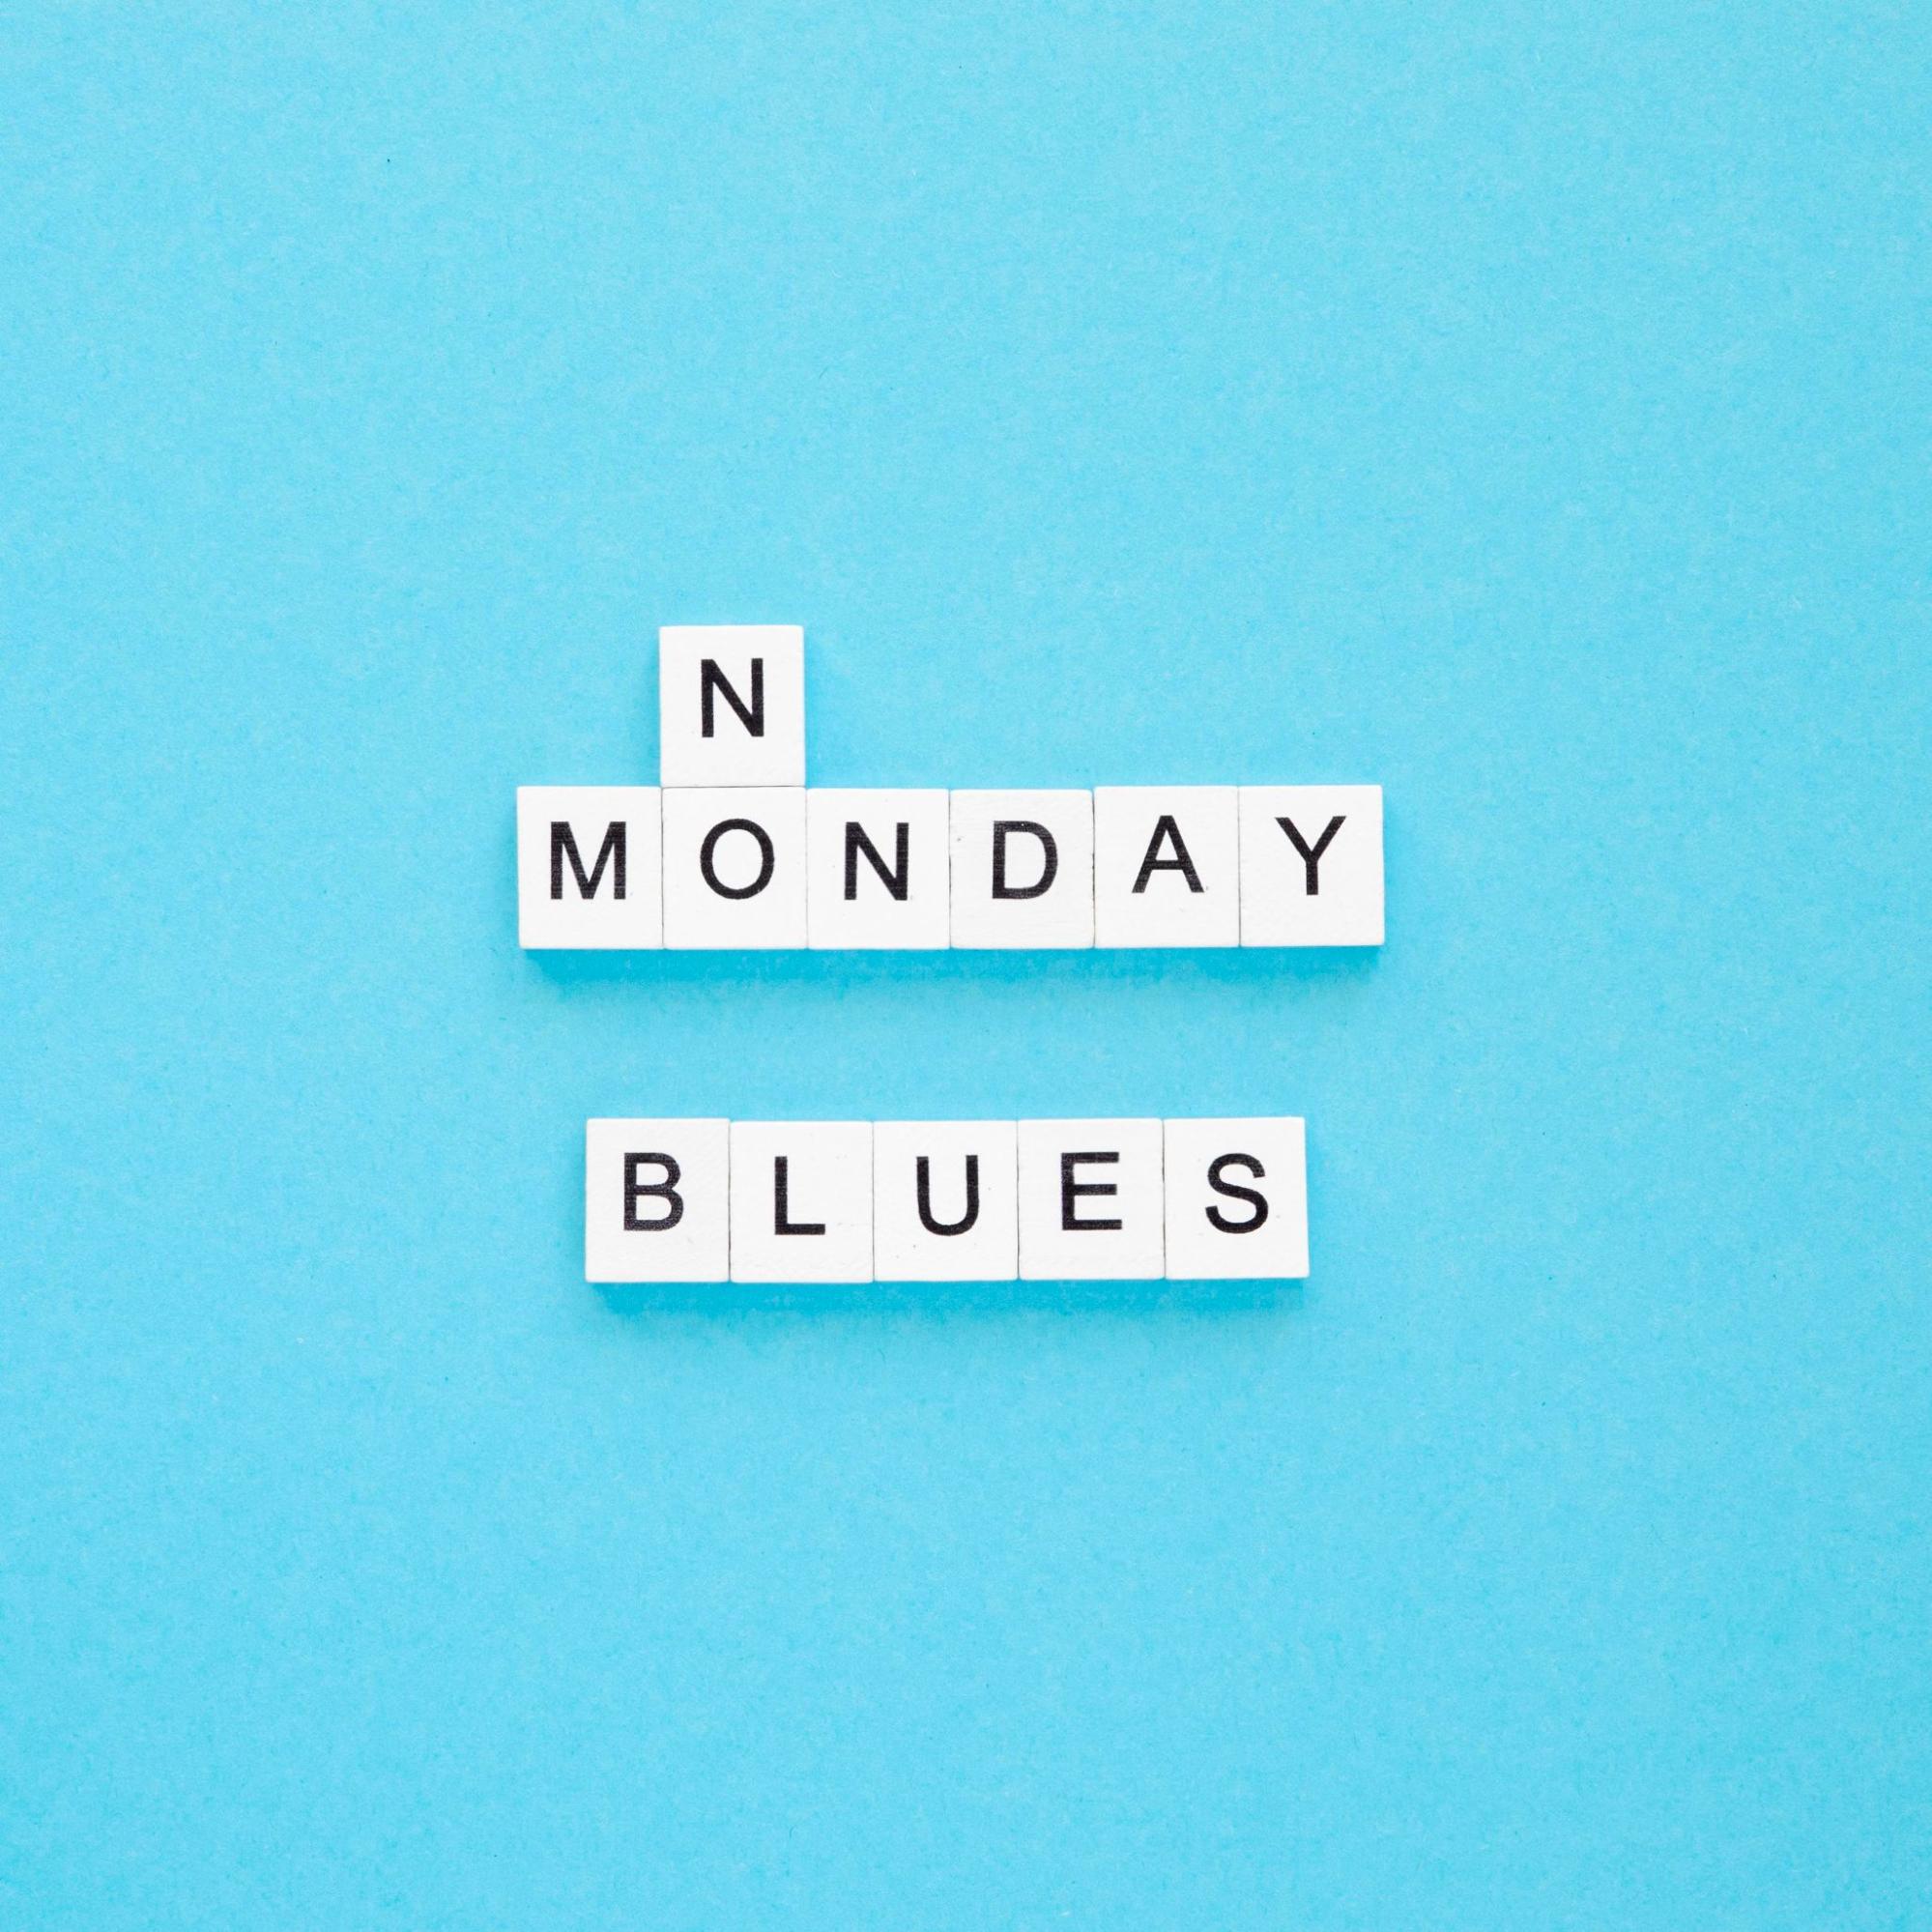 Monday Blues: Definition, Causes, and How to Overcome It